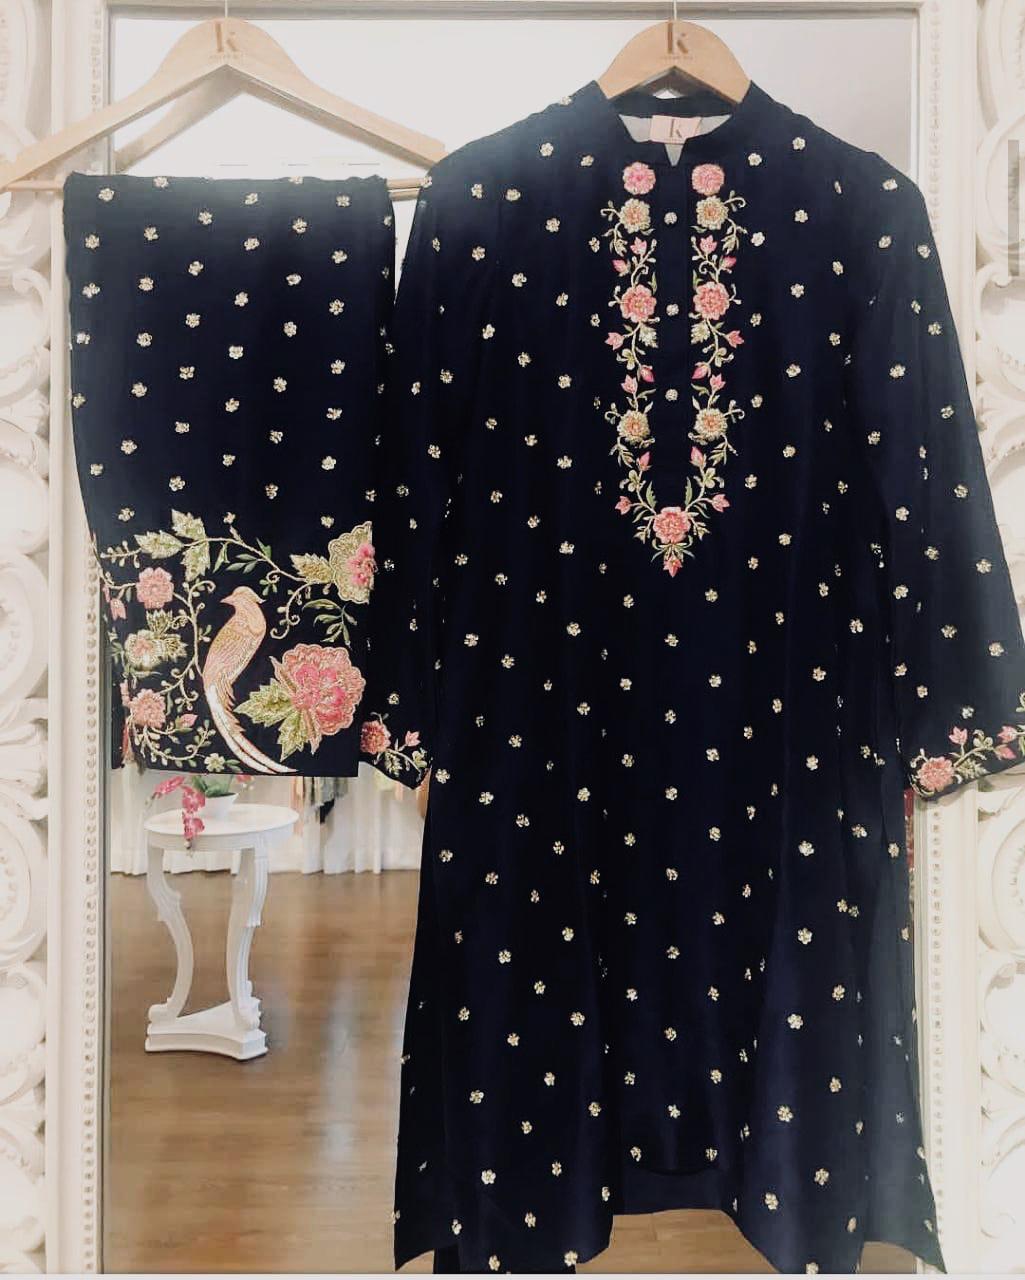 agha noor fancy dresses 2019 with price